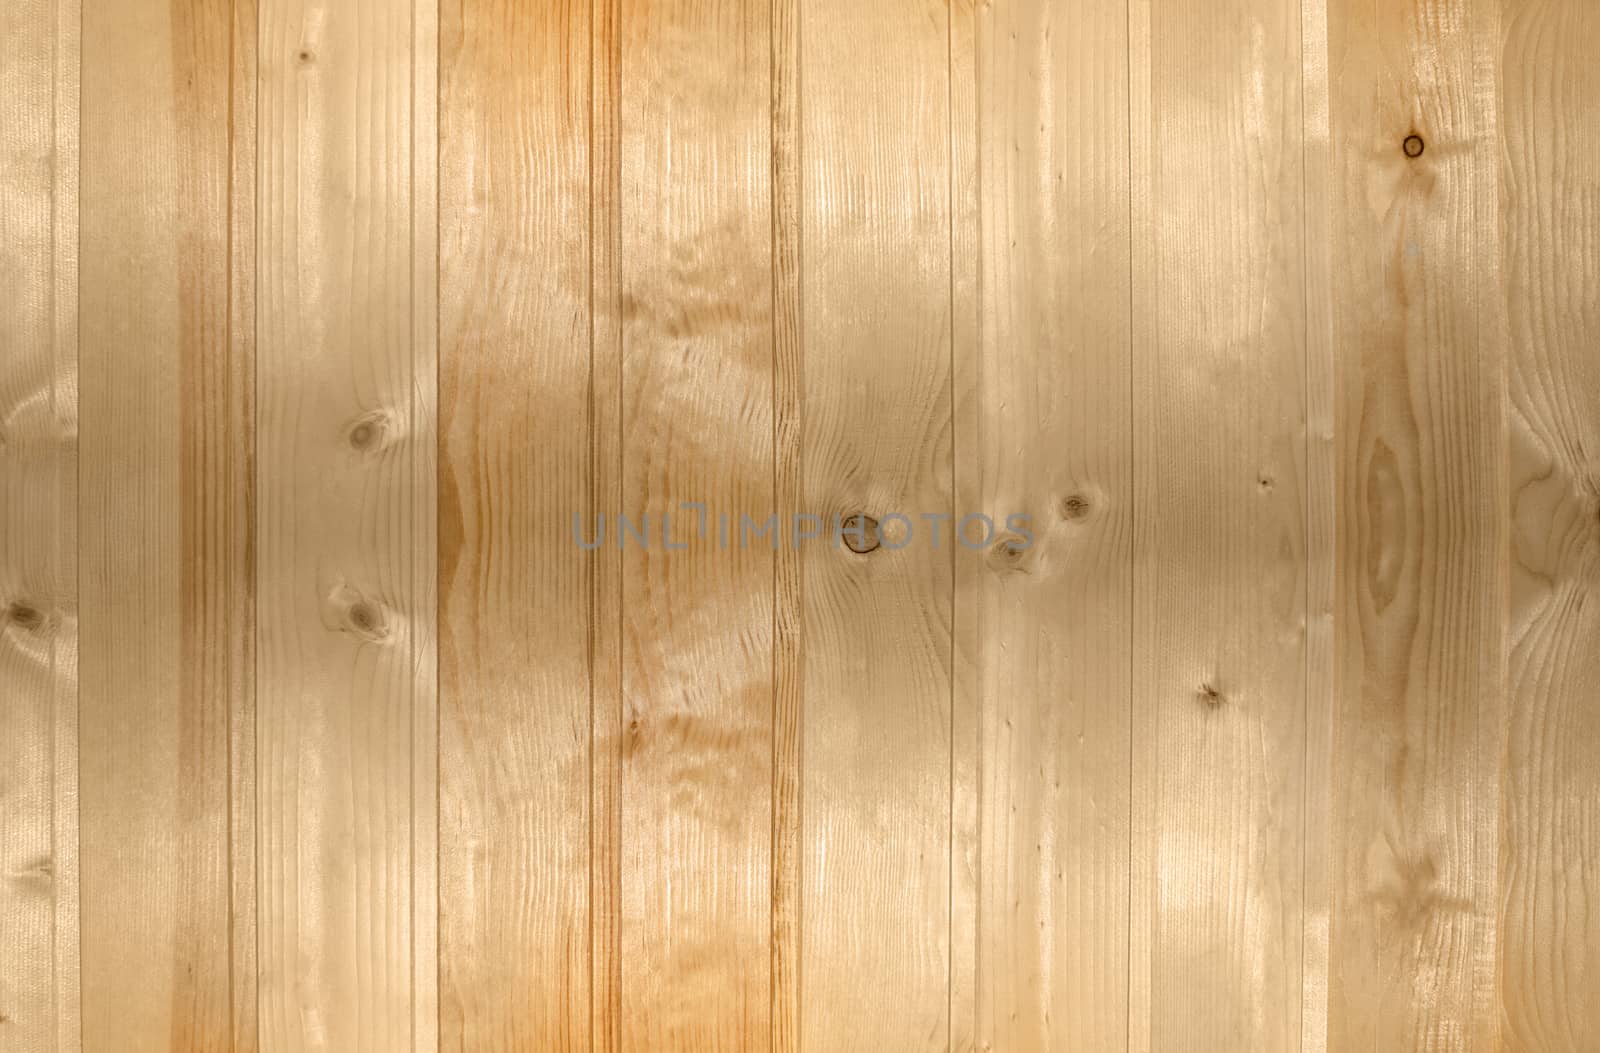 Background of not dyed natural boards by Gaina